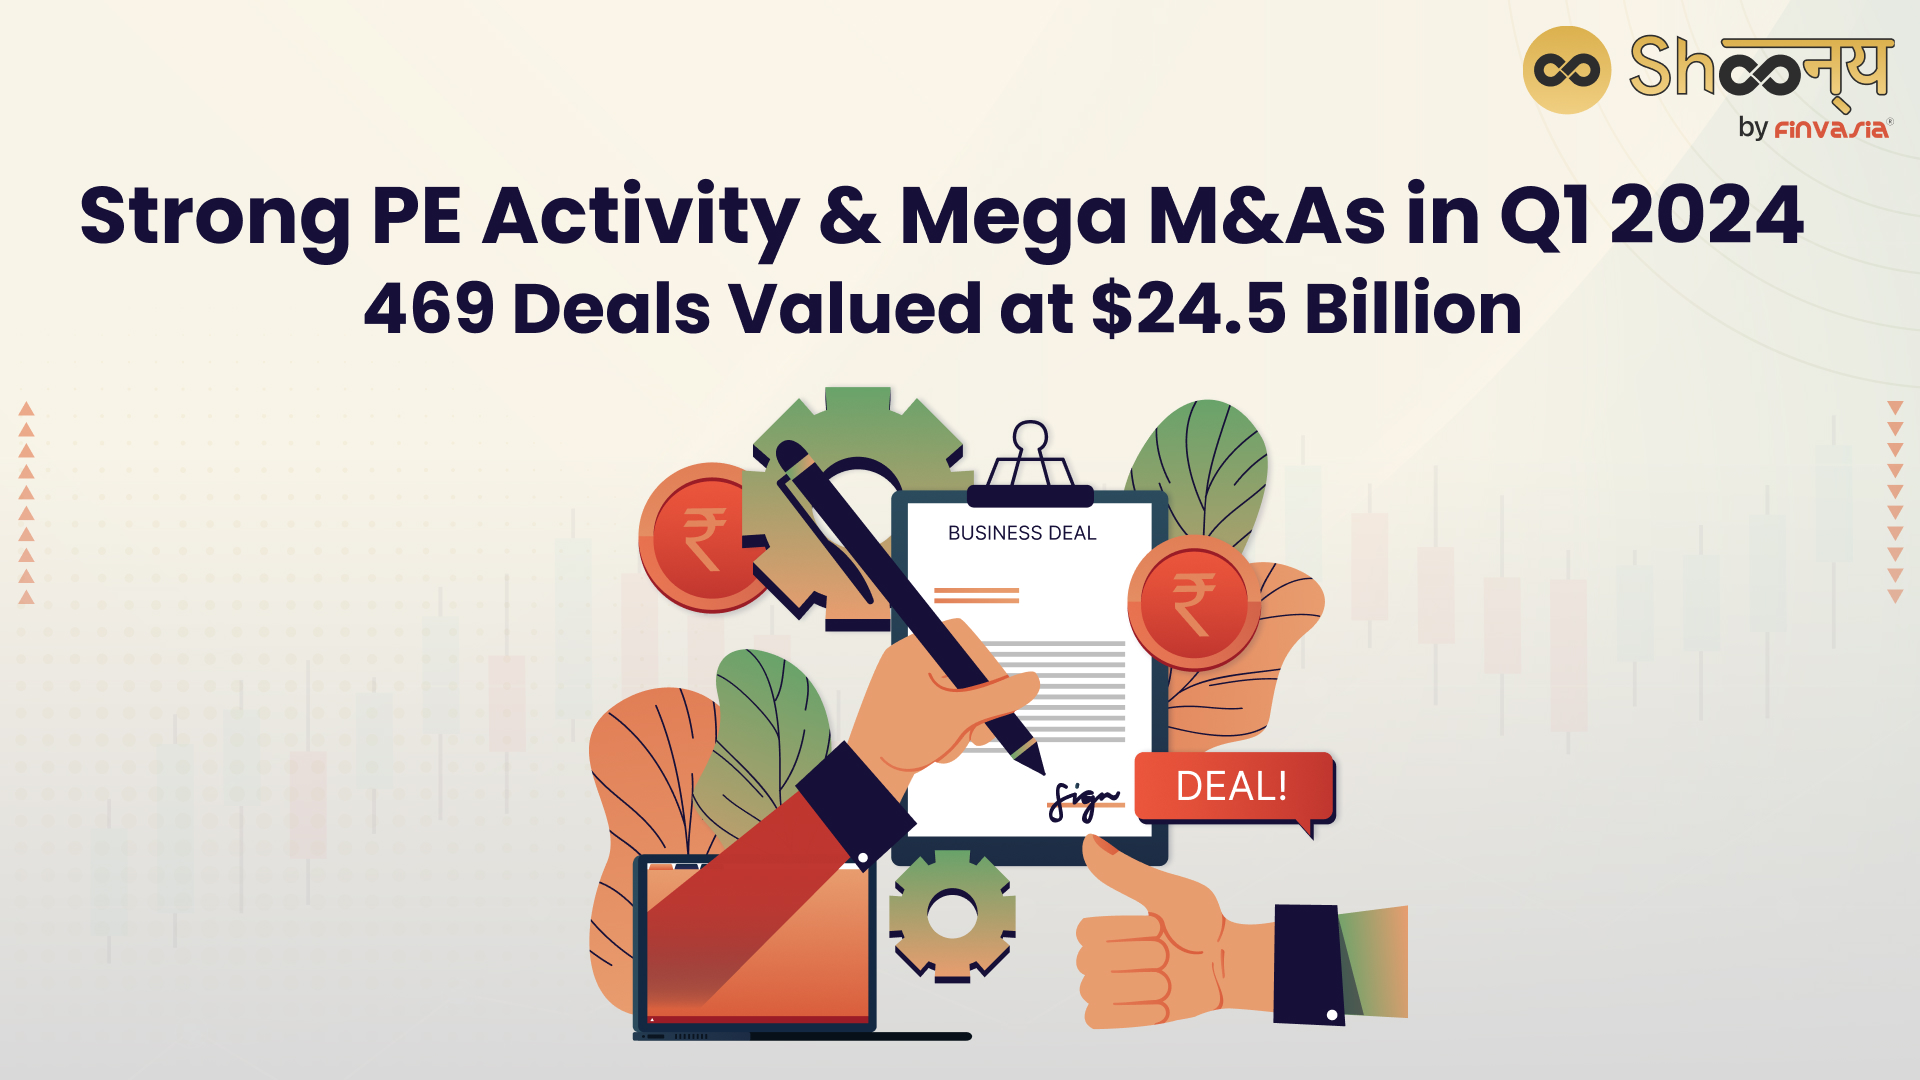 
  Robust PE Activity and Mergers and Acquisitions (M&A ) Drive Q1 2024 Deals to $24.5 Billion